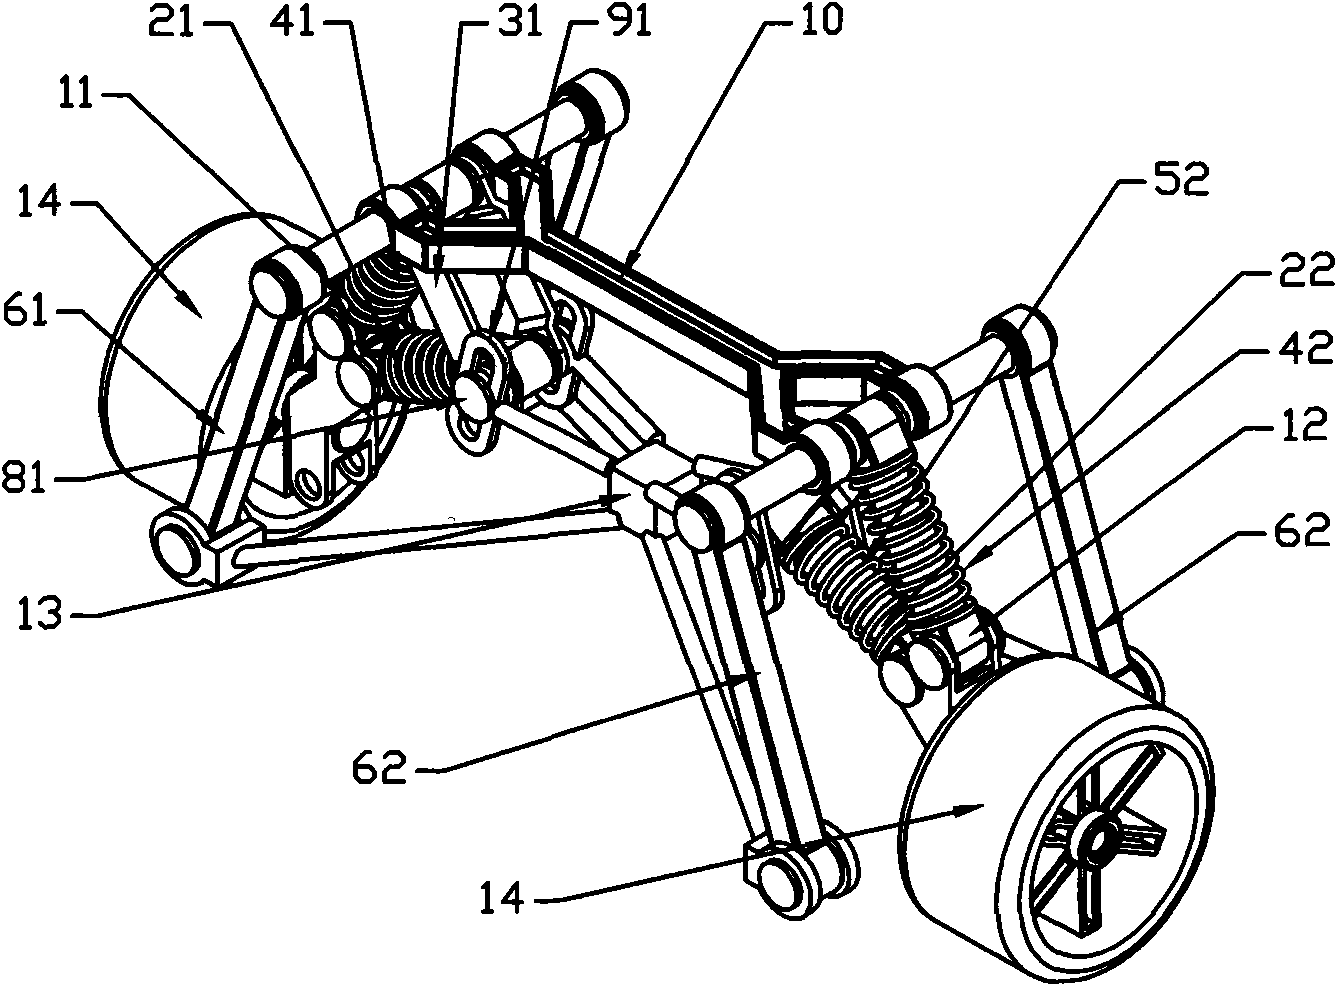 Automobile suspension system capable of generating negative-value inclination angle